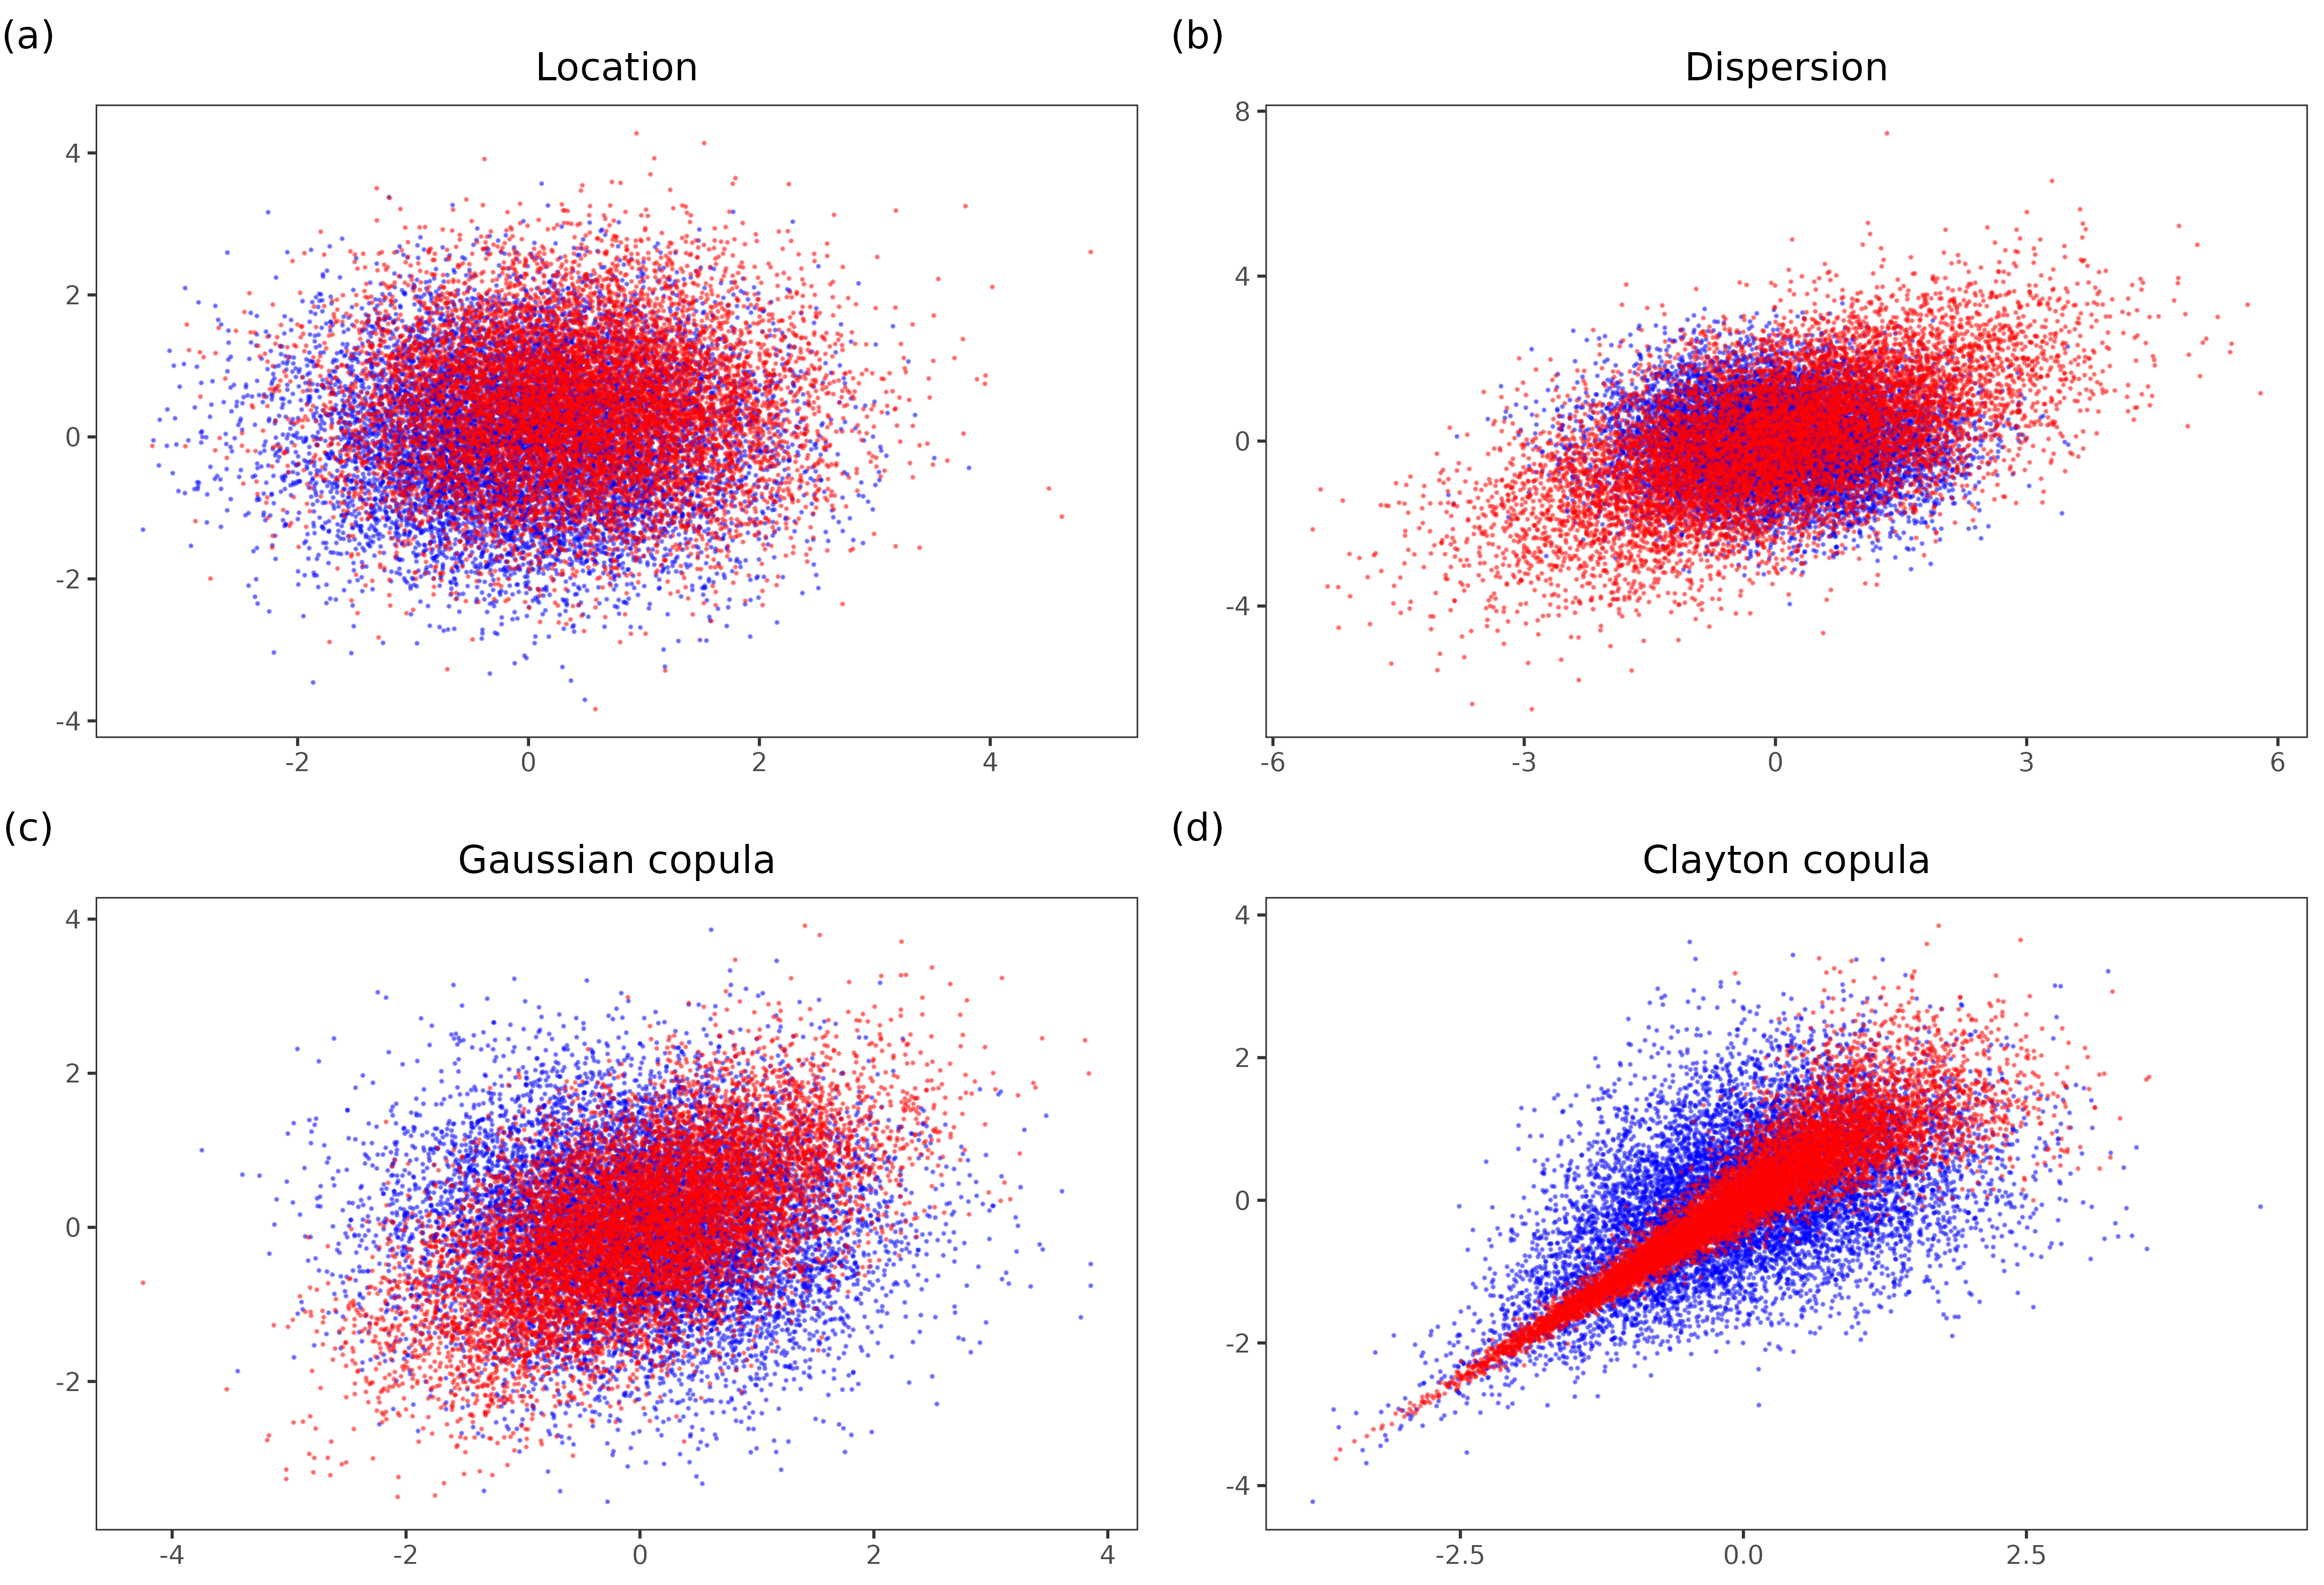 Figure 4: Visualization of the distributions used in power analyses. Each plot shows two samples consisting of 10000 points each. The first sample S_{1} is shown in blue, and the second sample S_{2} is shown in red. (a) S_{1}\sim N_{2}(\mathbf{0},\mathbf{I}_{2}) and S_{2}\sim N_{2}(\mathbf{0.4},\mathbf{I}_{2}). (b) S_{1}\sim N_{2}(\mathbf{0},\mathbf{I}_{2}) and S_{2}\sim N_{2}(\mathbf{0},\mathbf{I}_{2}+1.5). (c) S_{1}\sim G_{2}(0) and S_{2}\sim G_{2}(0.6). (d) S_{1}\sim C_{2}(1) and S_{2}\sim C_{2}(8).